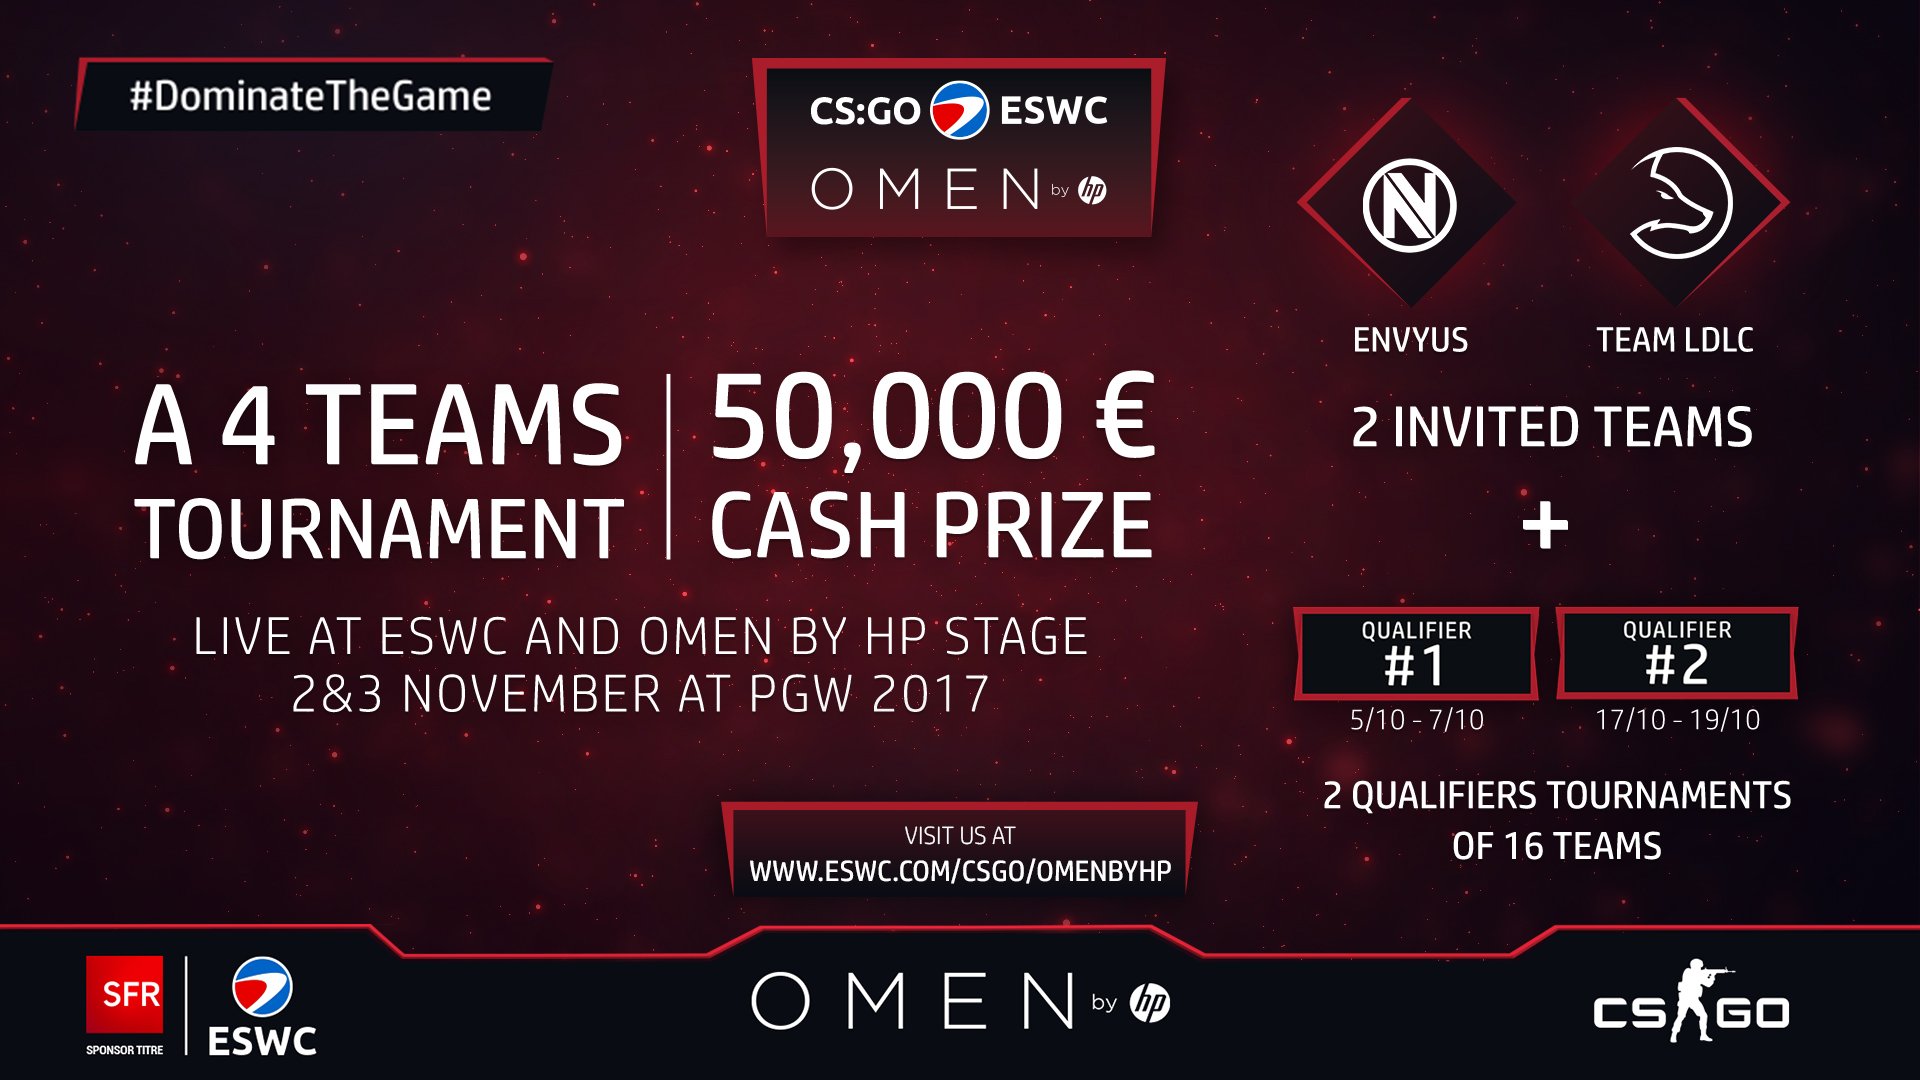 ESWC to host a $50,000 tournament at PGW 2017 Esports Tales